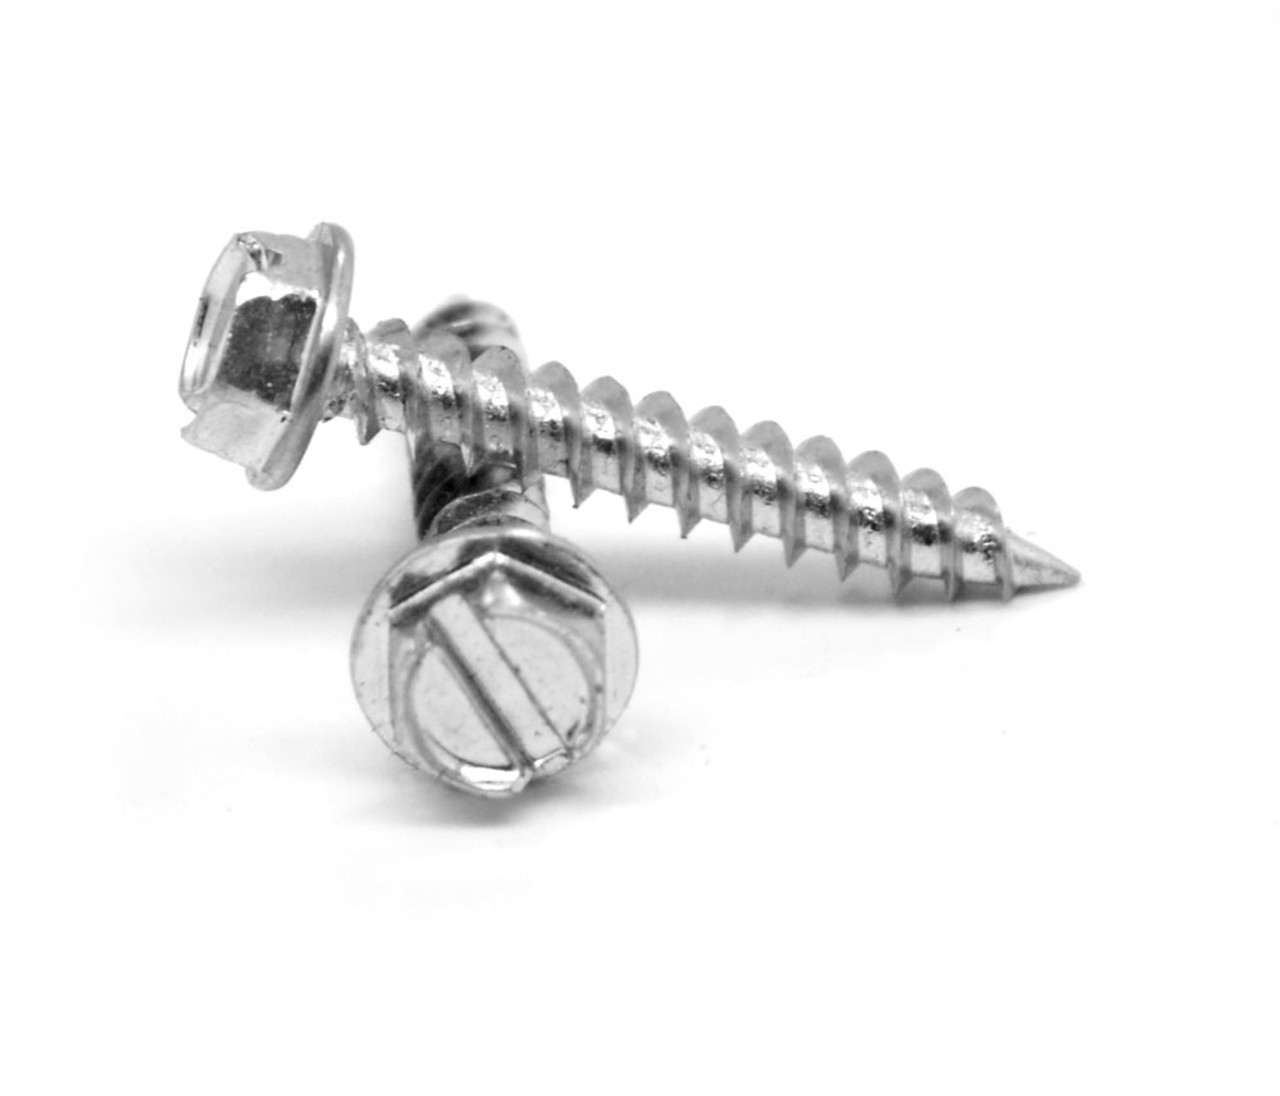 #10-12 x 1/2" Sheet Metal Screw Slotted Hex Washer Head Type A Low Carbon Steel Zinc Plated